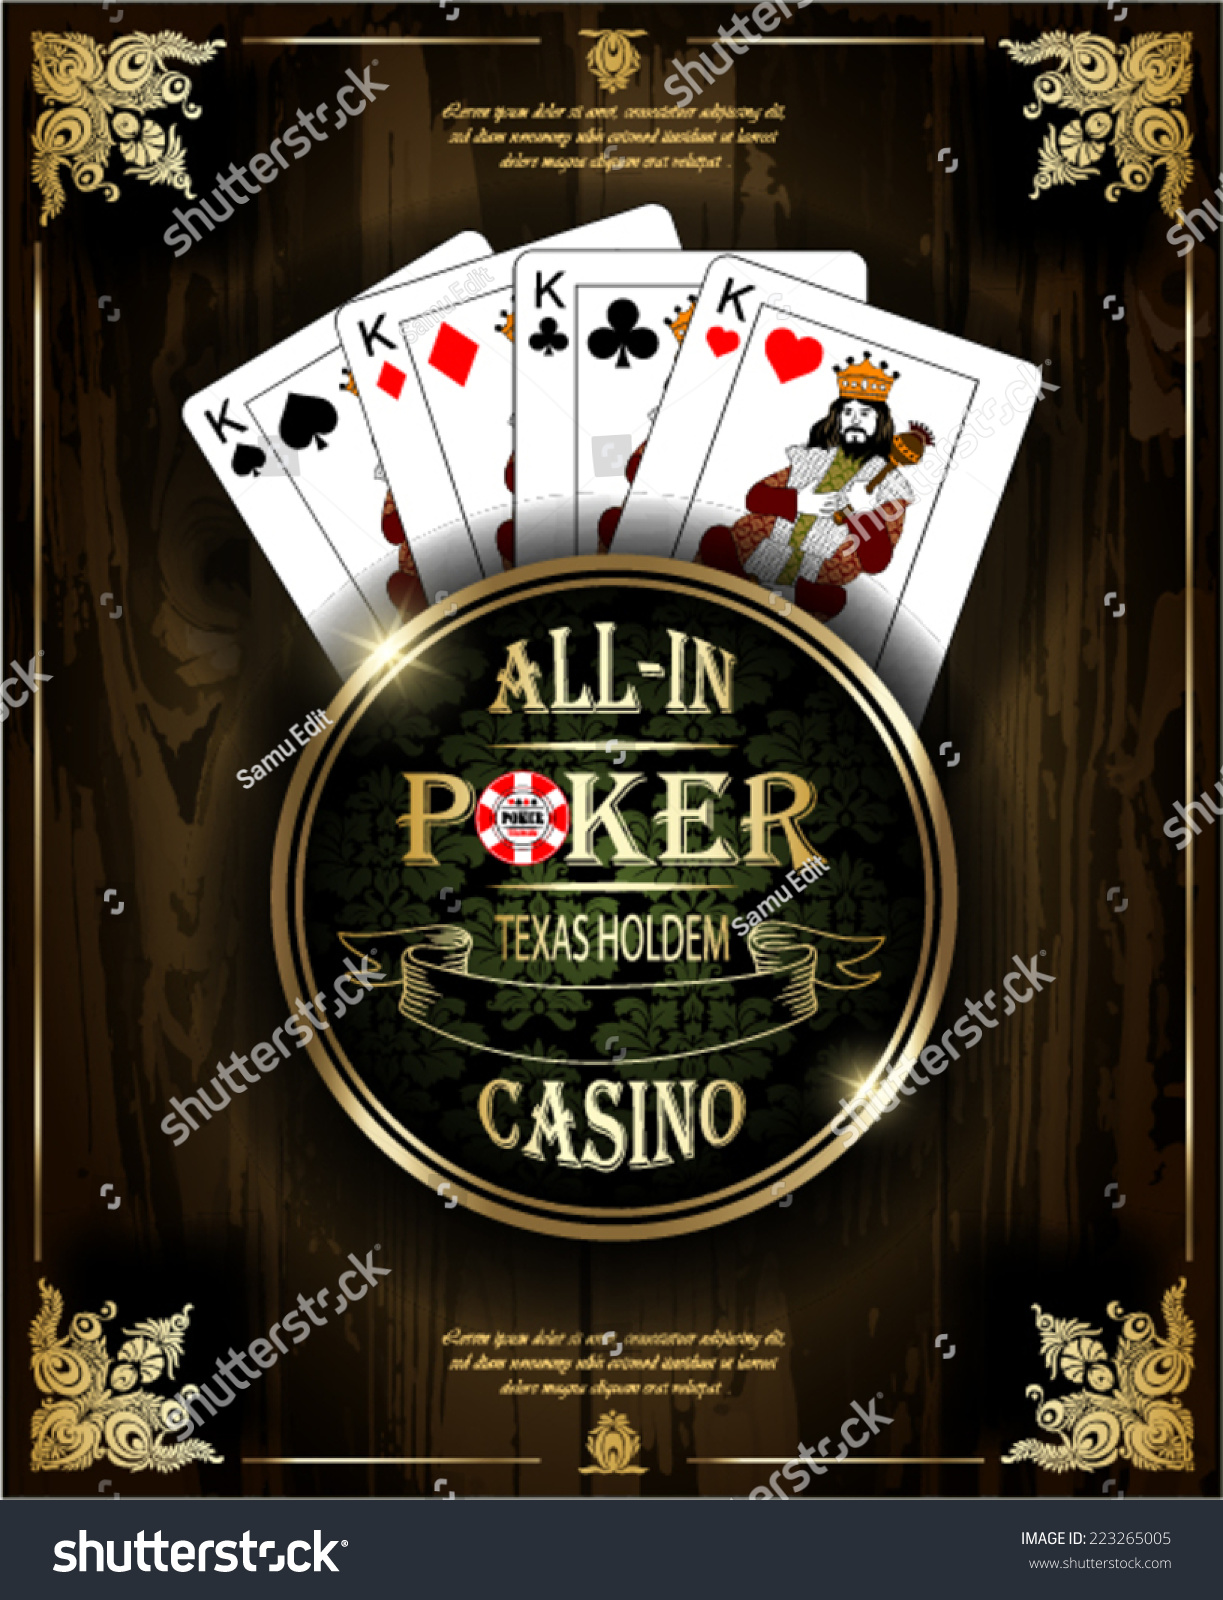 Controversial why not highway Poker Kings Vector Background Poker Casino Stock Vector (Royalty Free)  223265005 | Shutterstock